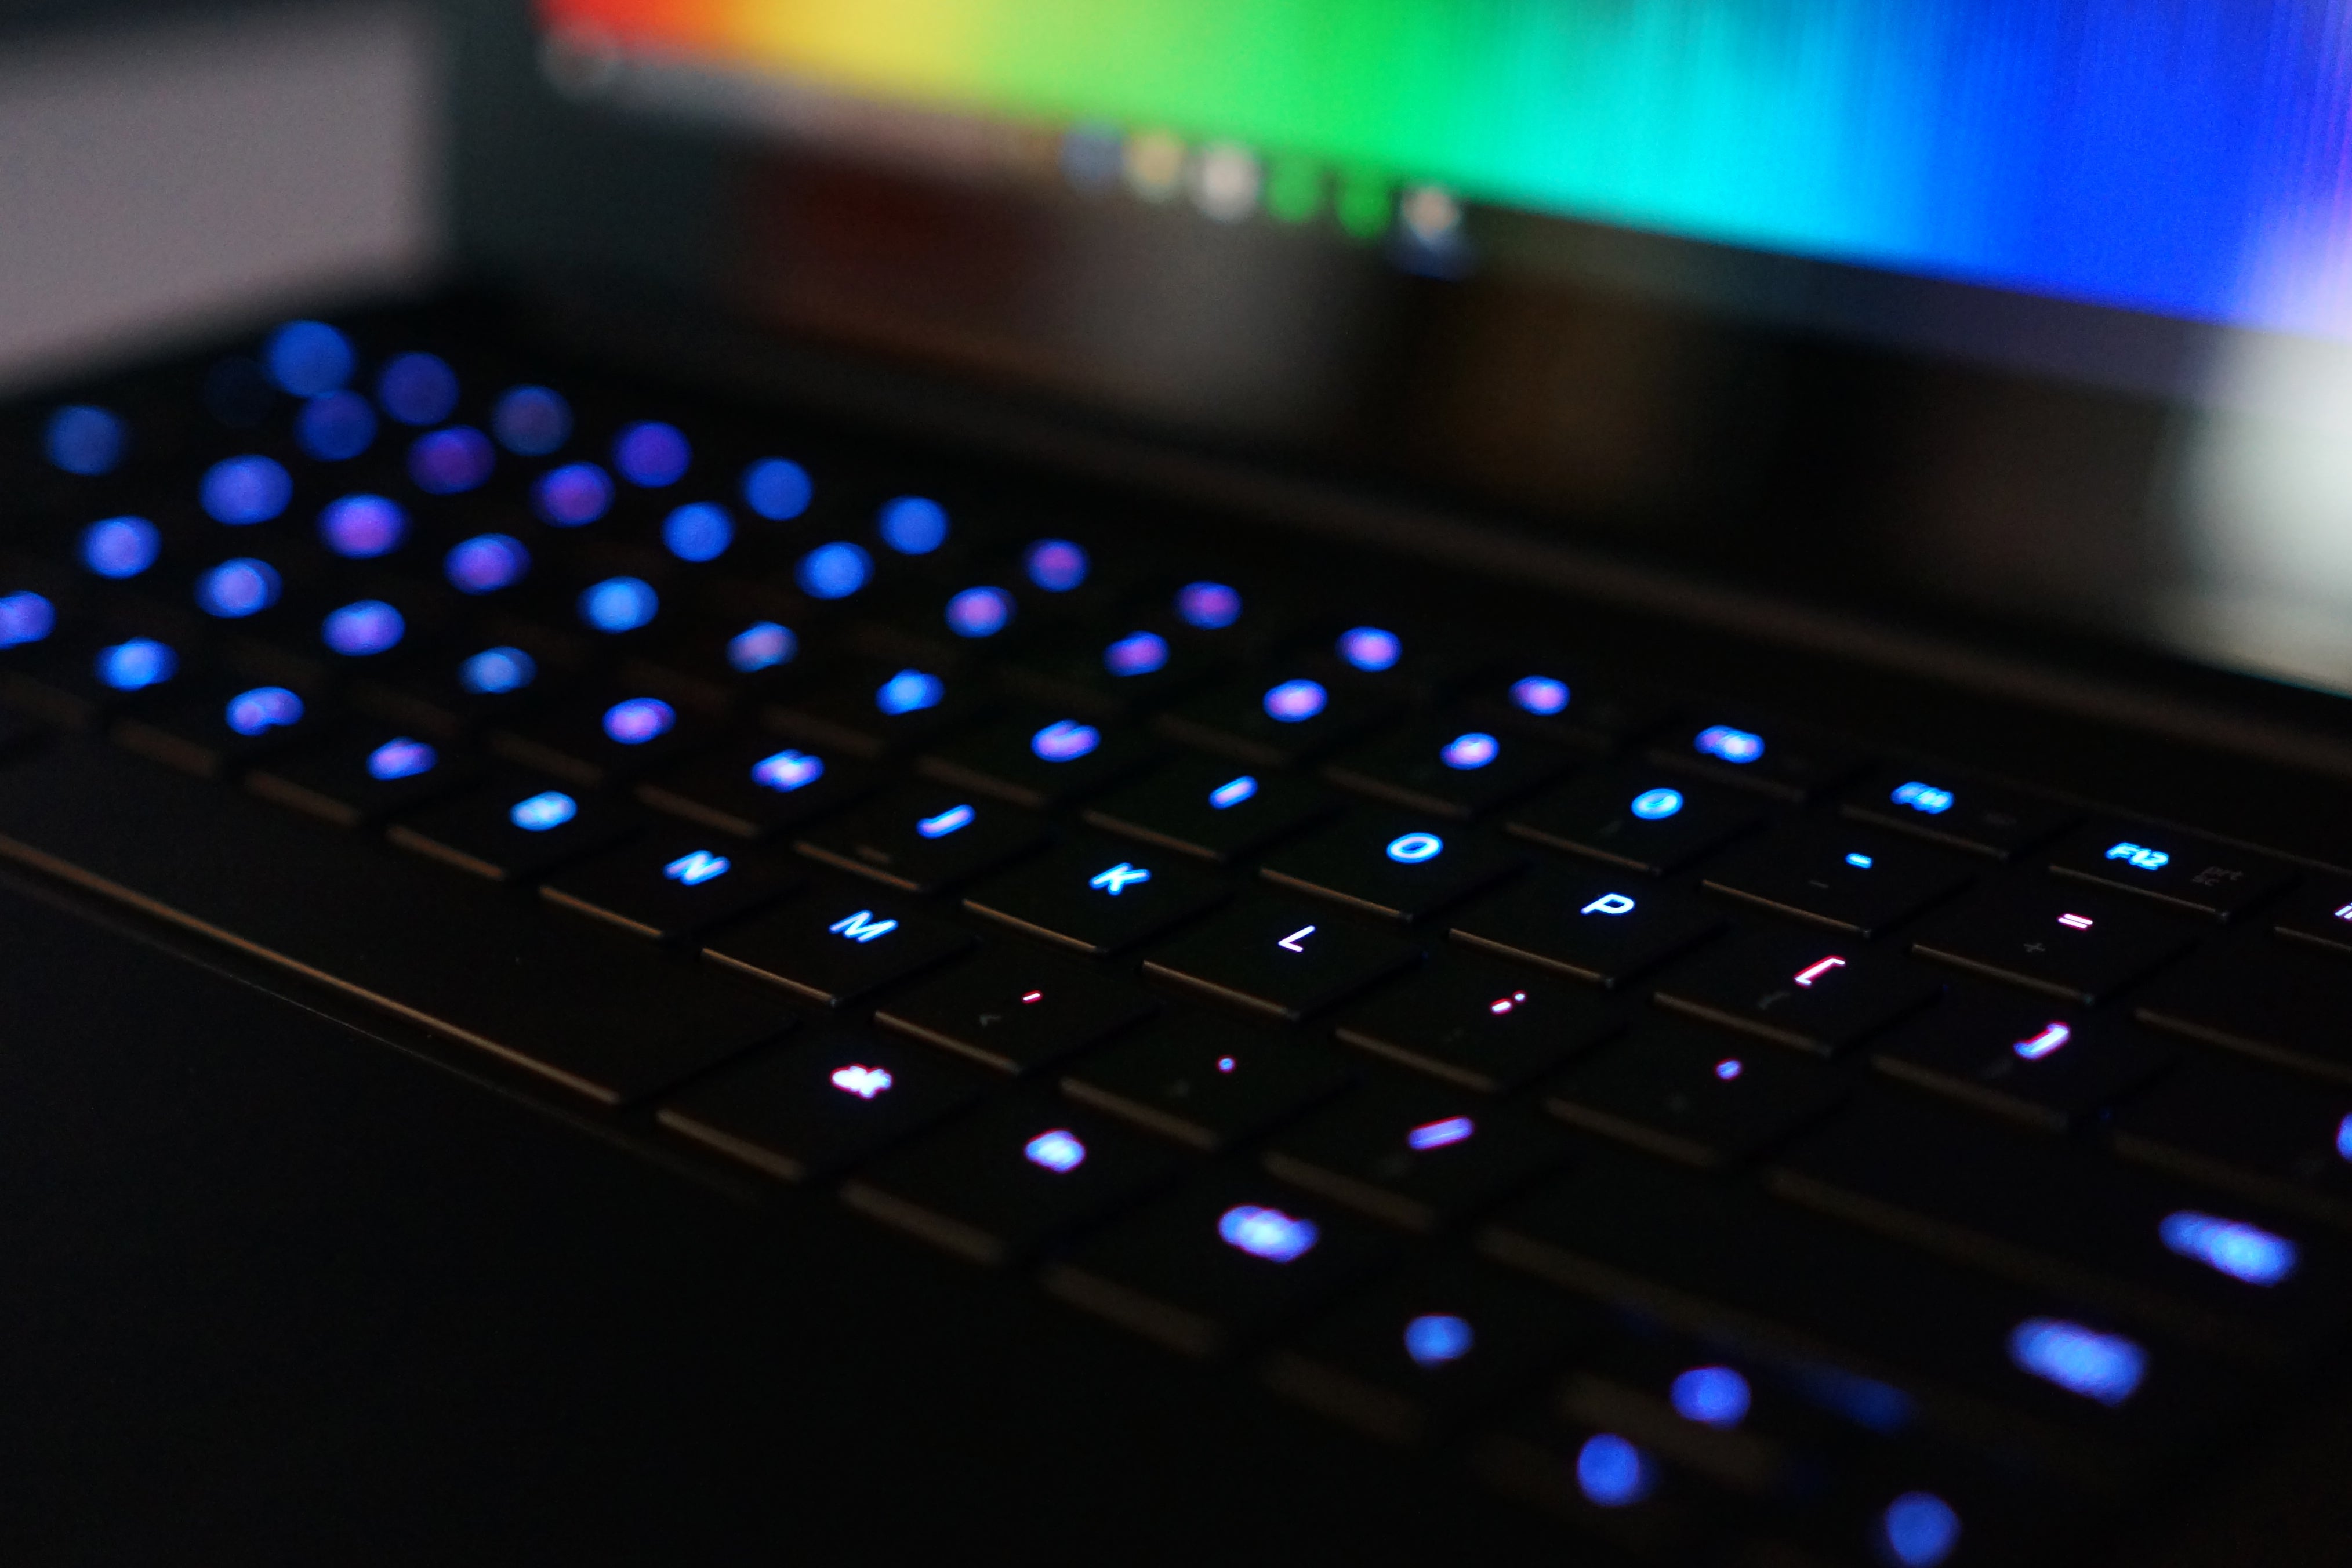 Razer Blade Stealth review: This is a feisty ultrabook at ...